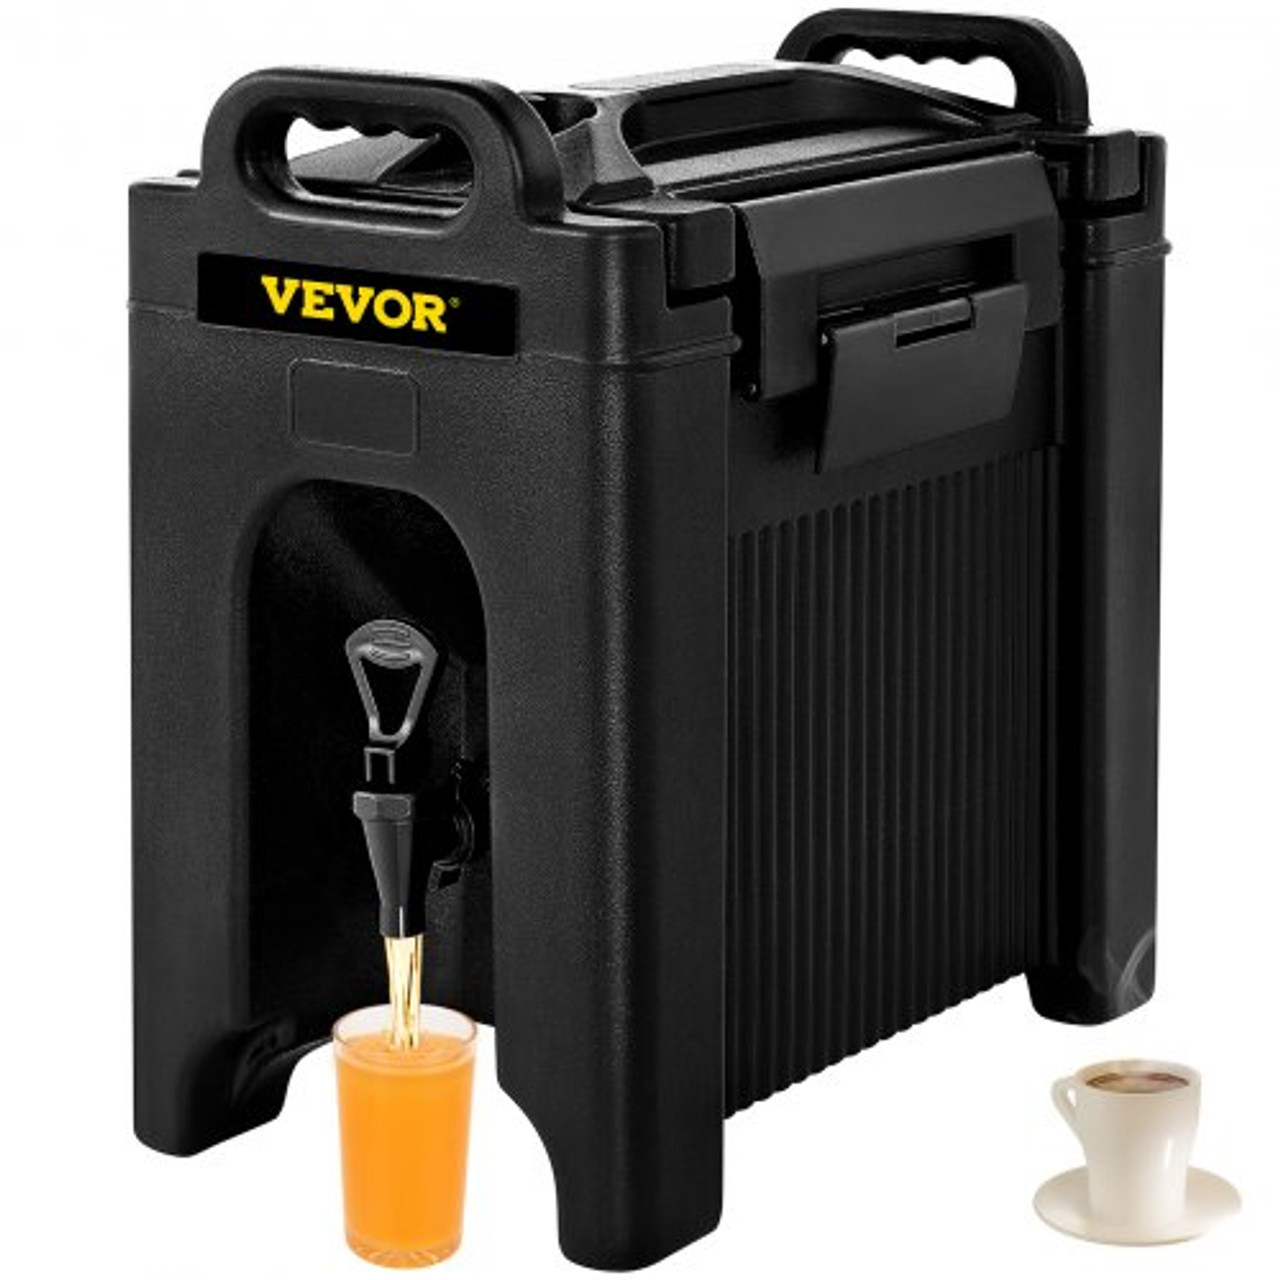 VEVOR Insulated Beverage Dispenser 2.5 Gal Double-Walled Beverage Server w/ PU Insulation Layer Hot and Cold Drink Dispenser w/ 2-Stage Faucet